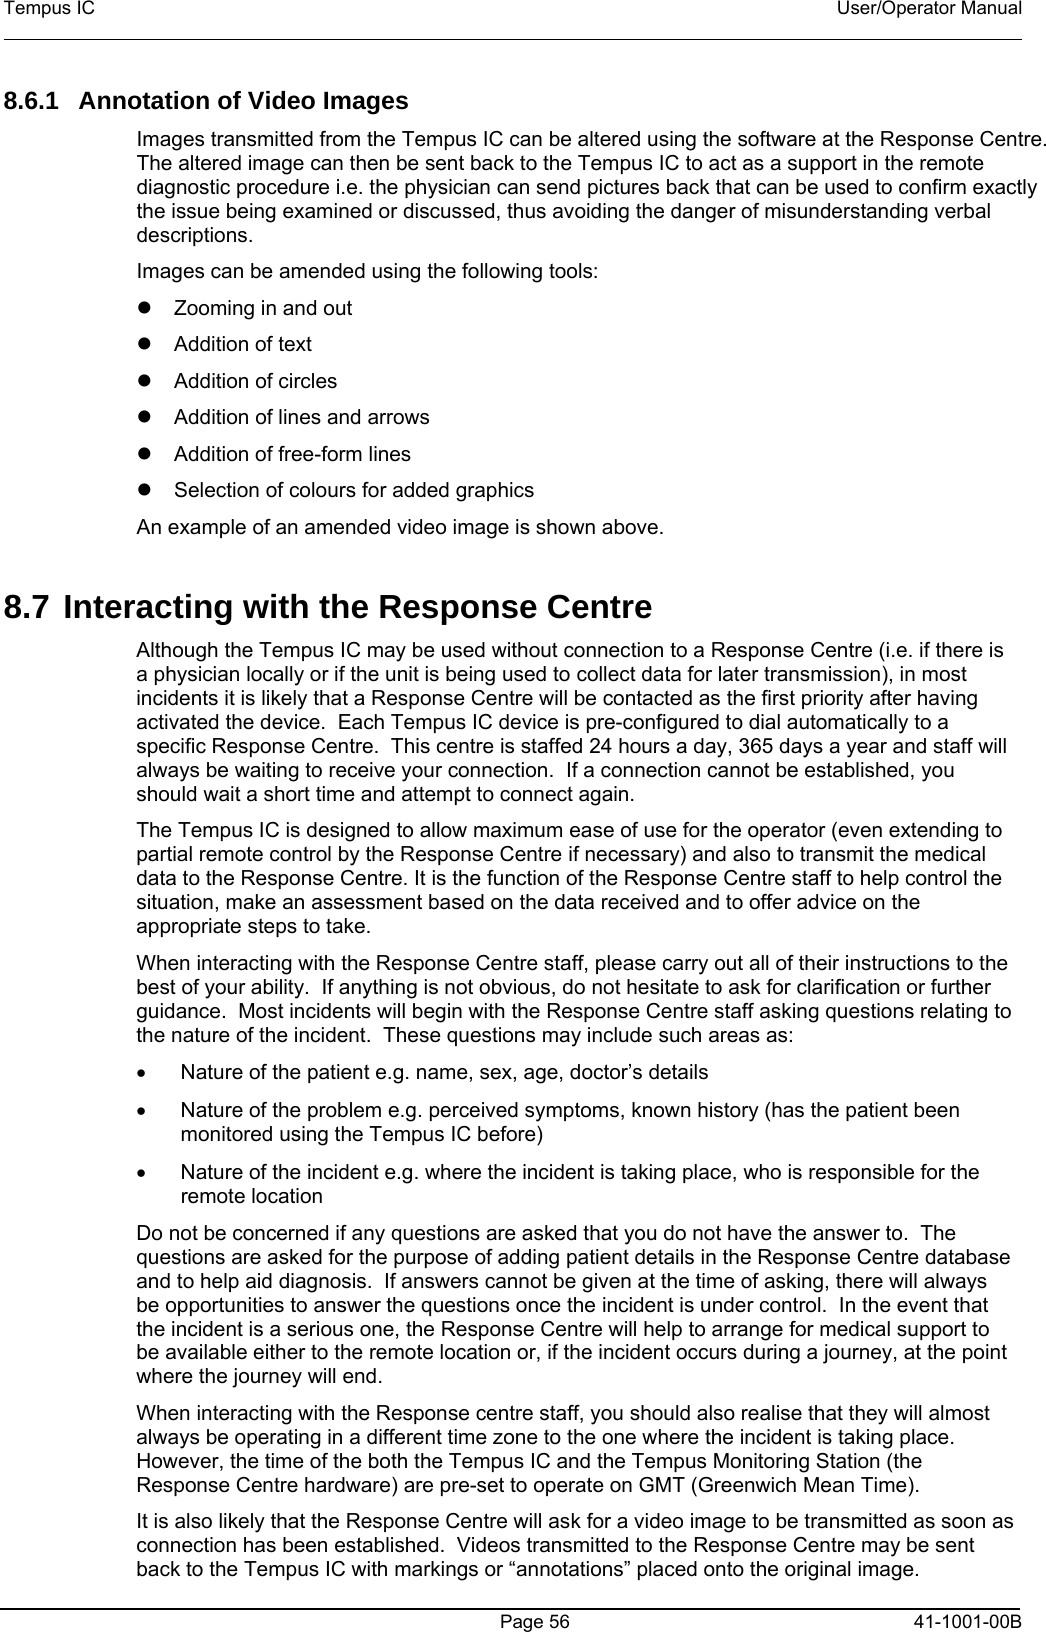 Tempus IC    User/Operator Manual      Page 56   41-1001-00B 8.6.1 Annotation of Video Images    Images transmitted from the Tempus IC can be altered using the software at the Response Centre.  The altered image can then be sent back to the Tempus IC to act as a support in the remote diagnostic procedure i.e. the physician can send pictures back that can be used to confirm exactly the issue being examined or discussed, thus avoiding the danger of misunderstanding verbal descriptions. Images can be amended using the following tools: z z z z z z Zooming in and out Addition of text Addition of circles Addition of lines and arrows Addition of free-form lines Selection of colours for added graphics An example of an amended video image is shown above.  8.7 Interacting with the Response Centre Although the Tempus IC may be used without connection to a Response Centre (i.e. if there is a physician locally or if the unit is being used to collect data for later transmission), in most incidents it is likely that a Response Centre will be contacted as the first priority after having activated the device.  Each Tempus IC device is pre-configured to dial automatically to a specific Response Centre.  This centre is staffed 24 hours a day, 365 days a year and staff will always be waiting to receive your connection.  If a connection cannot be established, you should wait a short time and attempt to connect again. The Tempus IC is designed to allow maximum ease of use for the operator (even extending to partial remote control by the Response Centre if necessary) and also to transmit the medical data to the Response Centre. It is the function of the Response Centre staff to help control the situation, make an assessment based on the data received and to offer advice on the appropriate steps to take. When interacting with the Response Centre staff, please carry out all of their instructions to the best of your ability.  If anything is not obvious, do not hesitate to ask for clarification or further guidance.  Most incidents will begin with the Response Centre staff asking questions relating to the nature of the incident.  These questions may include such areas as: •  Nature of the patient e.g. name, sex, age, doctor’s details •  Nature of the problem e.g. perceived symptoms, known history (has the patient been monitored using the Tempus IC before) •  Nature of the incident e.g. where the incident is taking place, who is responsible for the remote location Do not be concerned if any questions are asked that you do not have the answer to.  The questions are asked for the purpose of adding patient details in the Response Centre database and to help aid diagnosis.  If answers cannot be given at the time of asking, there will always be opportunities to answer the questions once the incident is under control.  In the event that the incident is a serious one, the Response Centre will help to arrange for medical support to be available either to the remote location or, if the incident occurs during a journey, at the point where the journey will end. When interacting with the Response centre staff, you should also realise that they will almost always be operating in a different time zone to the one where the incident is taking place.  However, the time of the both the Tempus IC and the Tempus Monitoring Station (the Response Centre hardware) are pre-set to operate on GMT (Greenwich Mean Time).  It is also likely that the Response Centre will ask for a video image to be transmitted as soon as connection has been established.  Videos transmitted to the Response Centre may be sent back to the Tempus IC with markings or “annotations” placed onto the original image.   